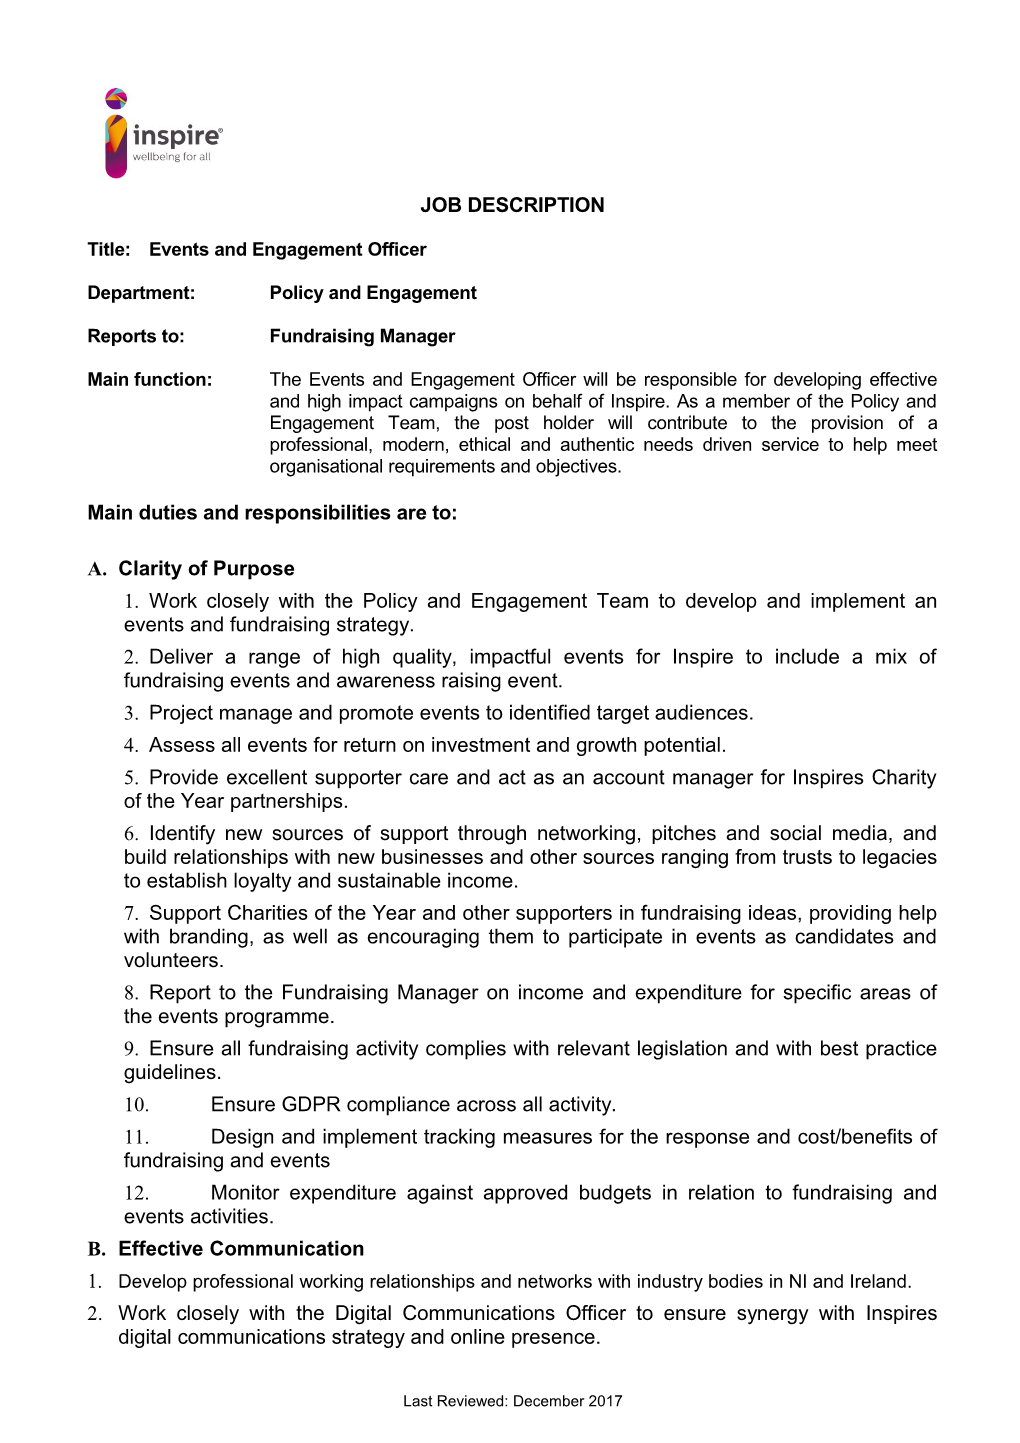 Title:Events and Engagement Officer